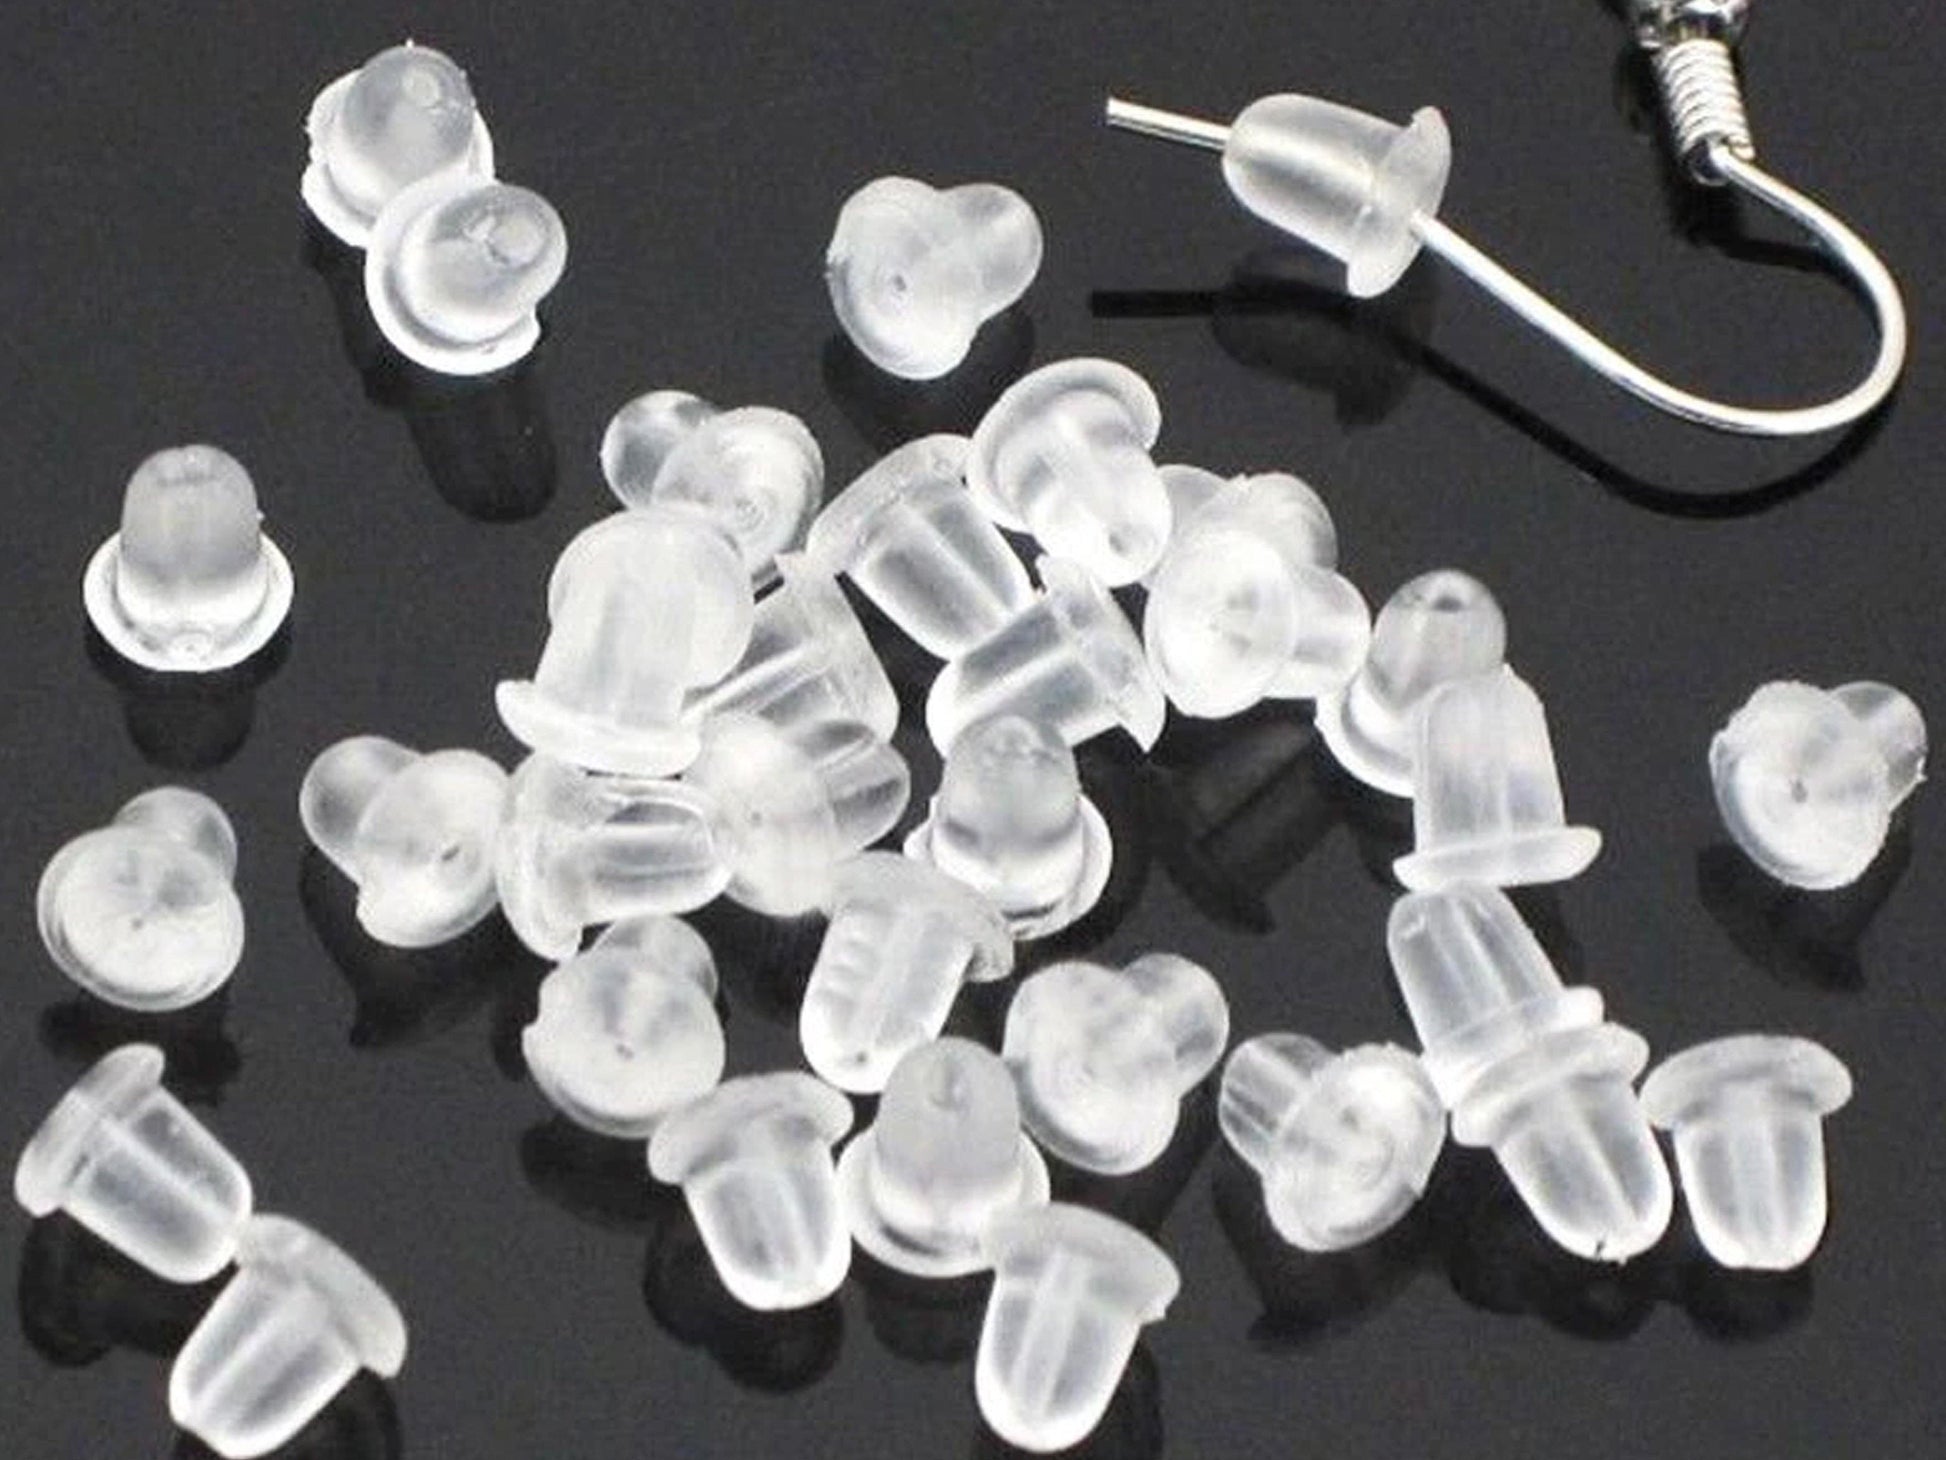 Silicone Rubber Earring Back - Clear aprox 10 pr